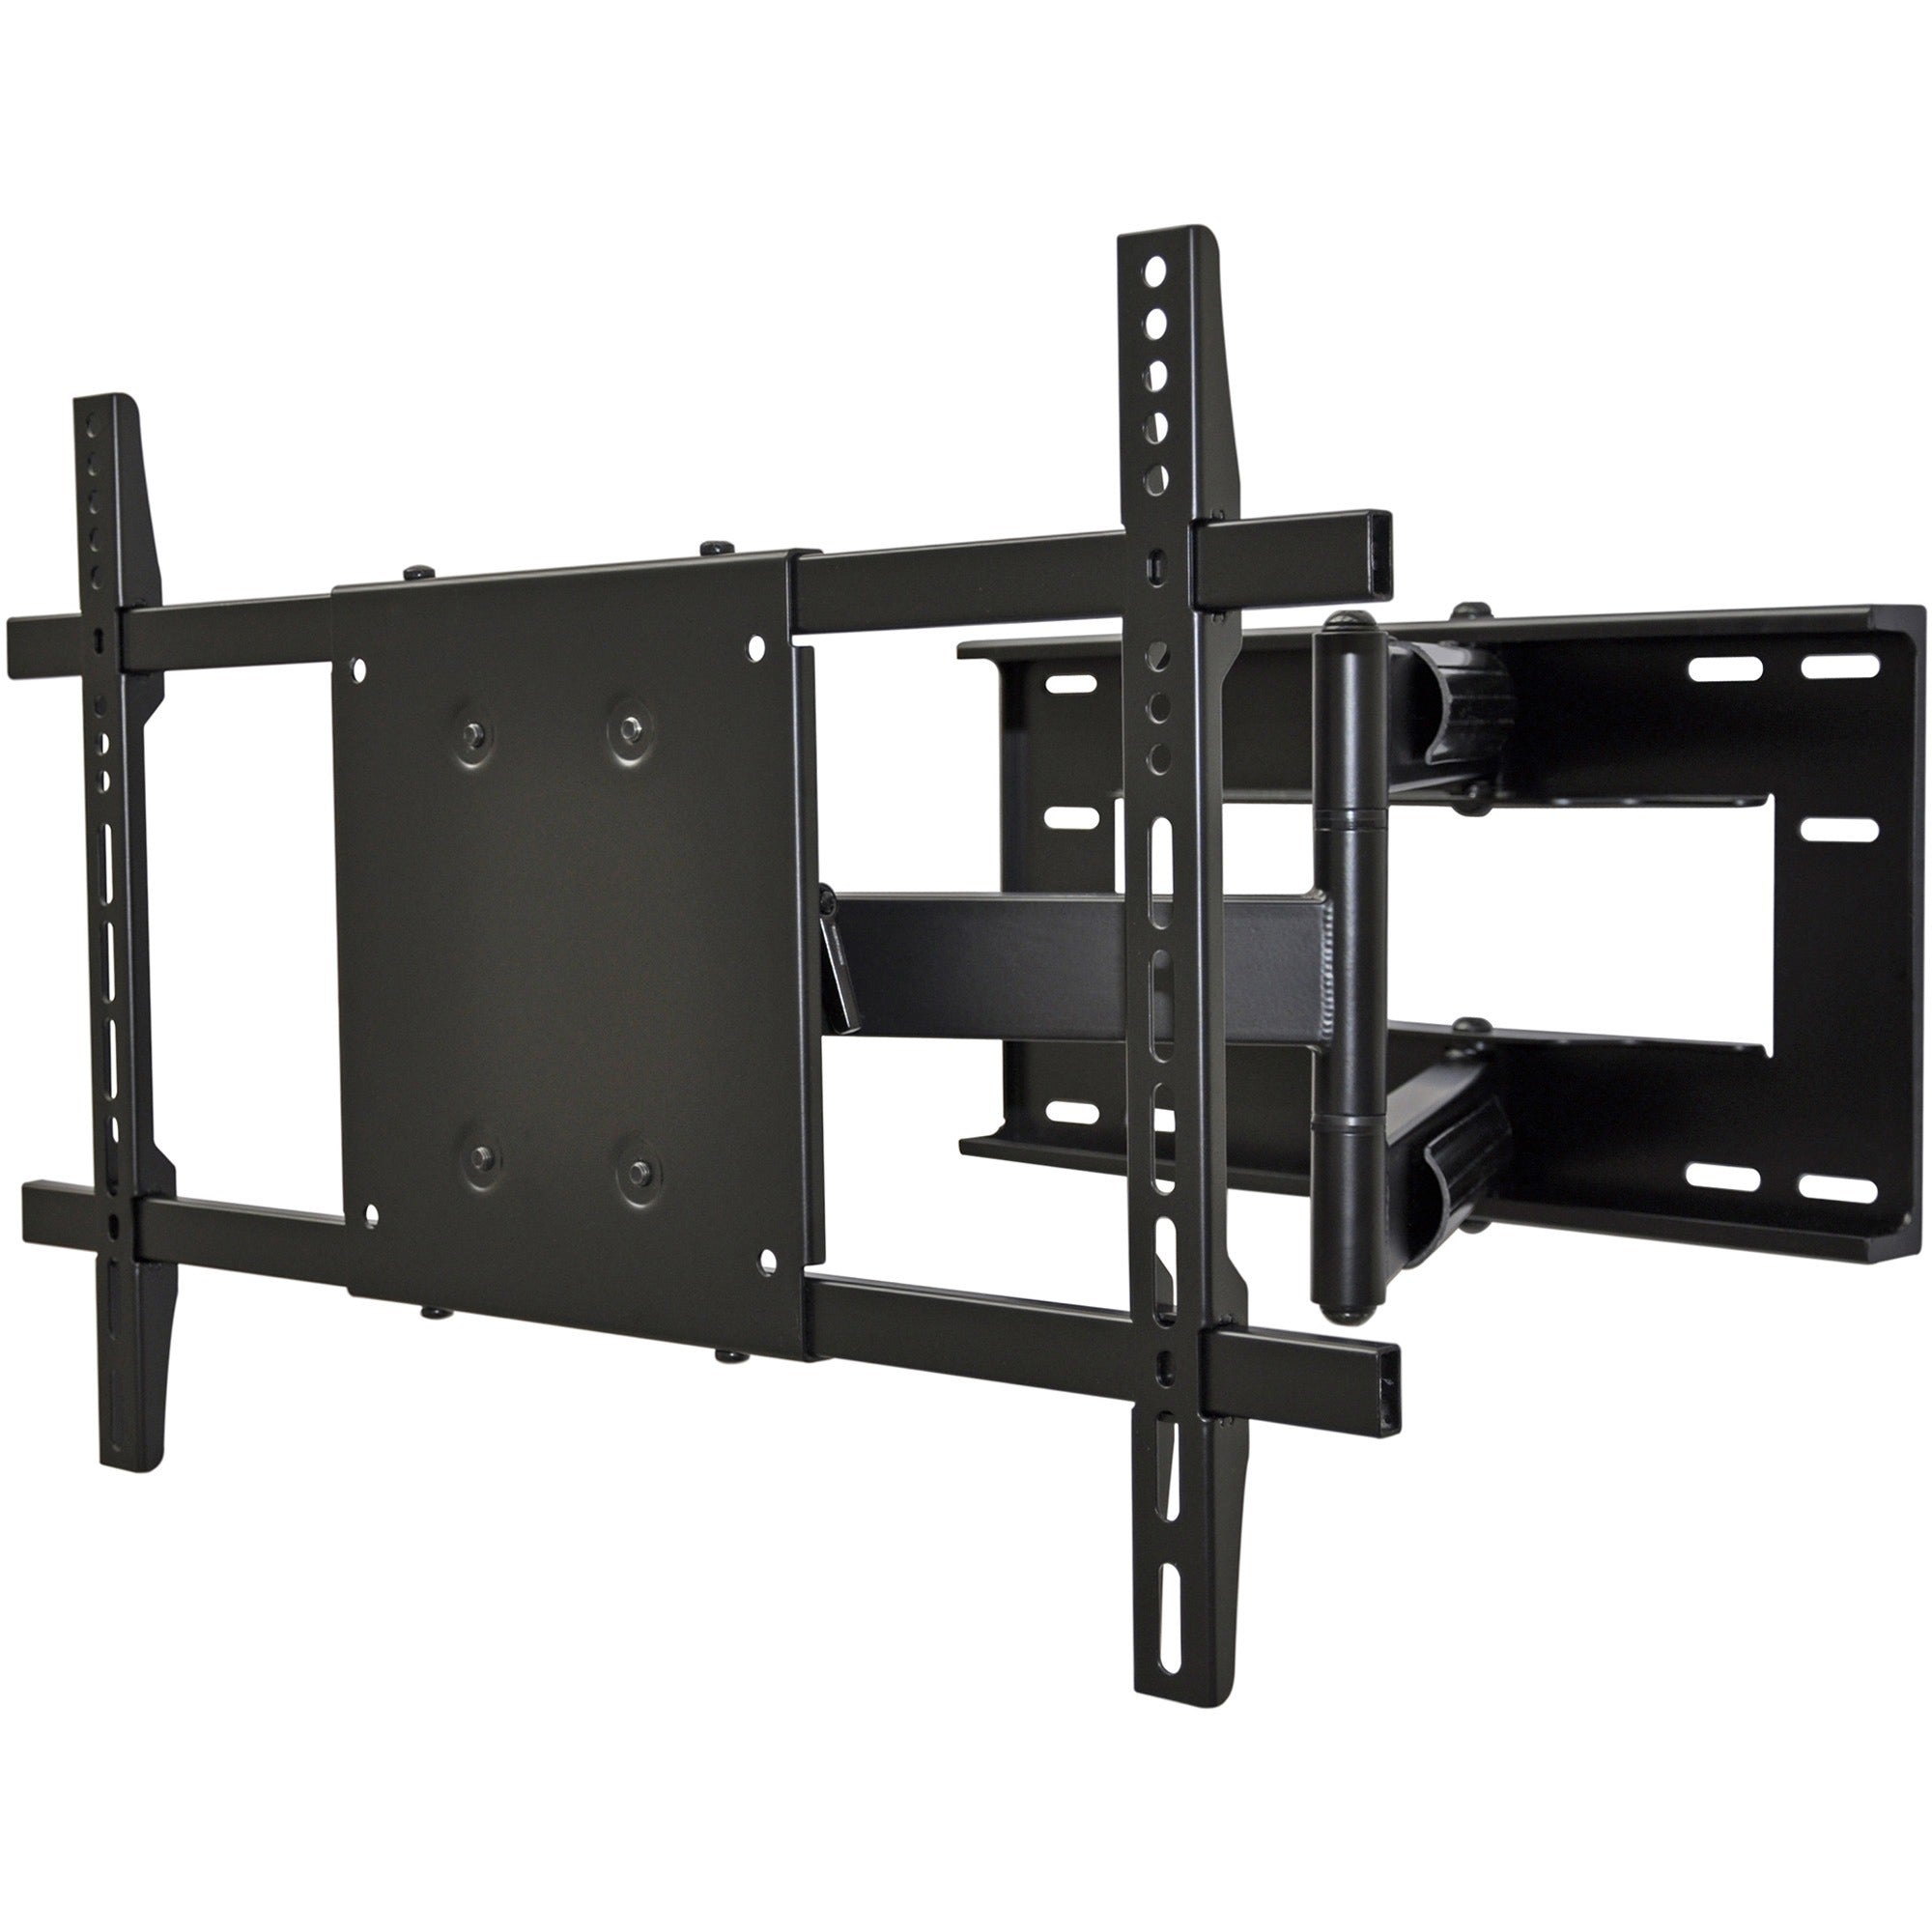 rocelco-vlda-mounting-bracket-for-tv-flat-panel-display-black-2-displays-supported-37-to-70-screen-support-150-lb-load-capacity-200-x-200-600-x-400-100-x-100-400-x-200-300-x-300-400-x-400-vesa-mount-compatible-1-each_rclrvlda - 1